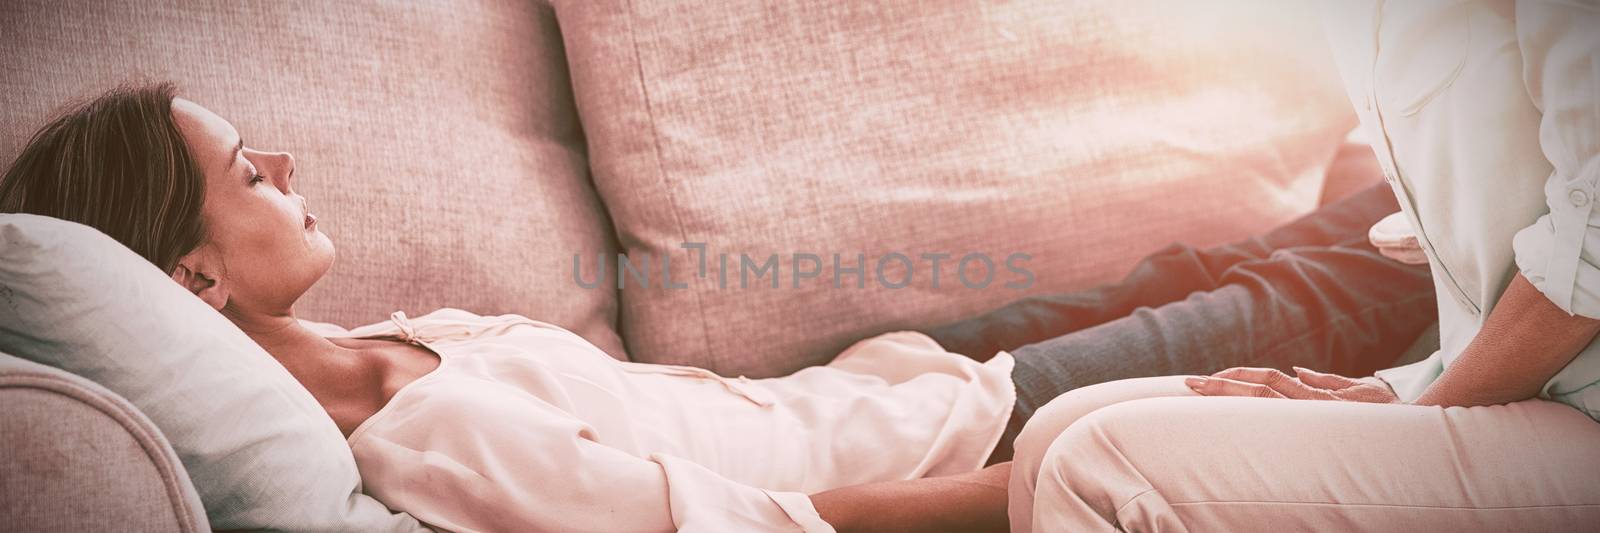 Hypnotherapist holding pendulum by patient on sofa at home